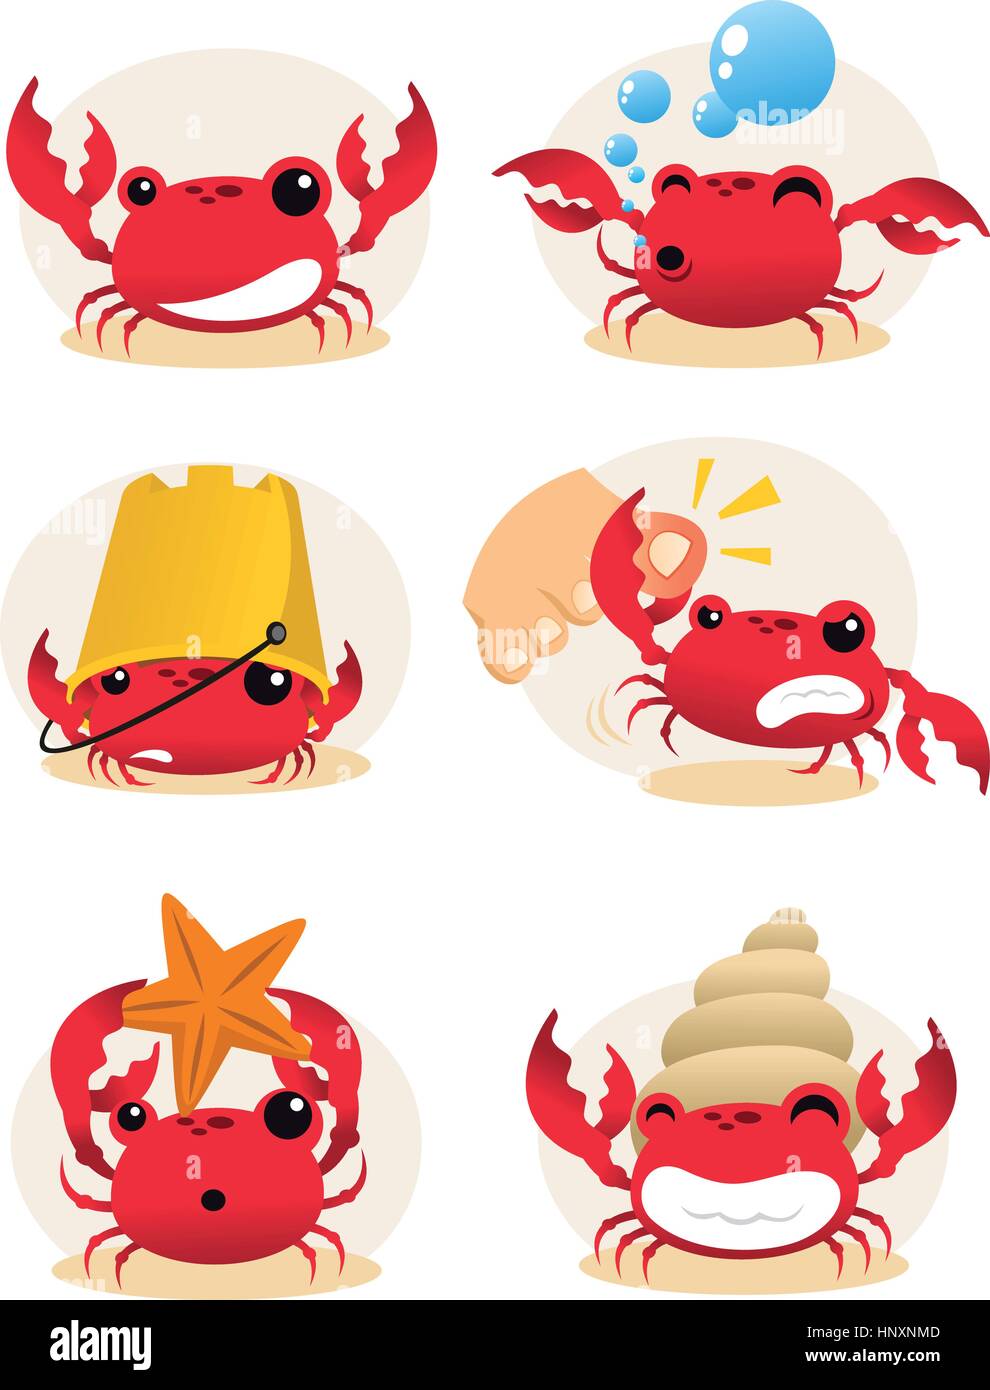 Red cartoon crab action set, with six different crabs in different situations vector illustration. Stock Vector